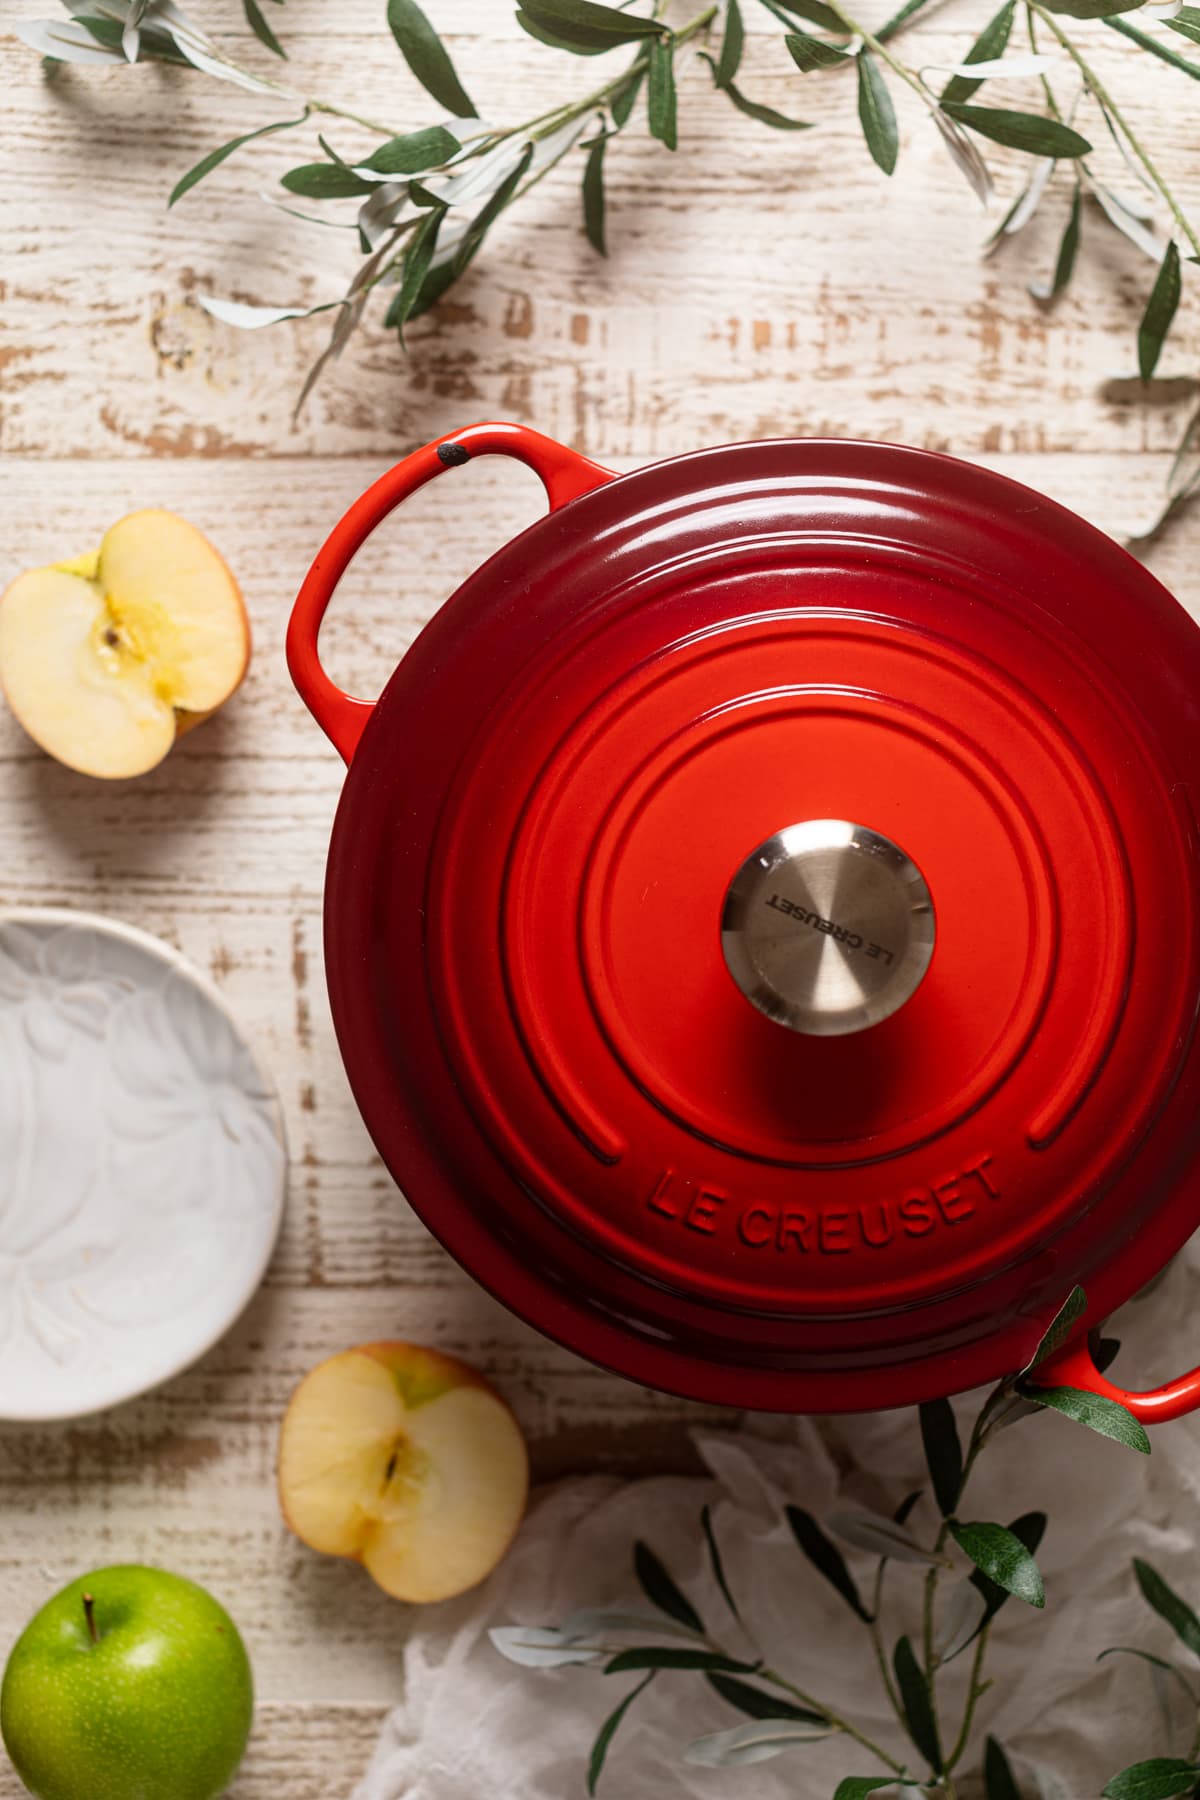 Red Le Creuset Dutch oven on a table with apples